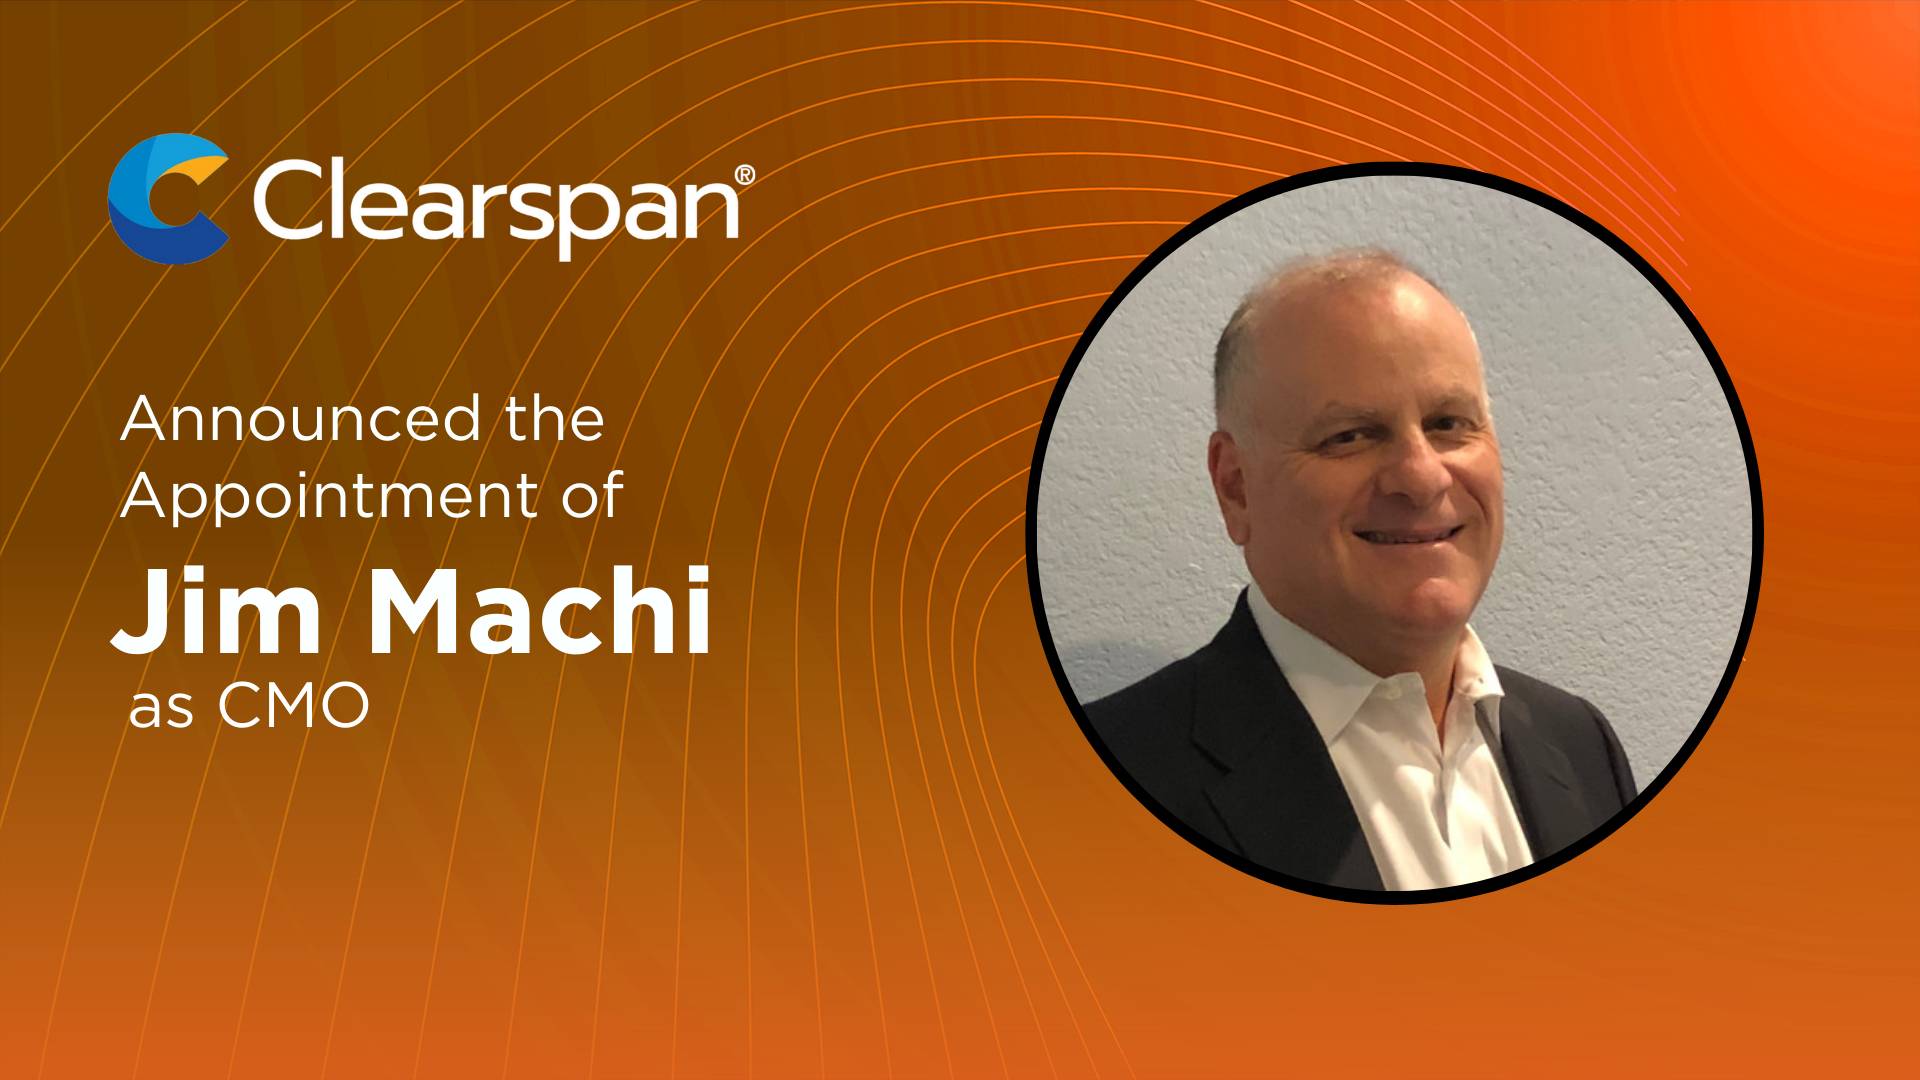 Clearspan Appoints Jim Machi as Chief Marketing Officer